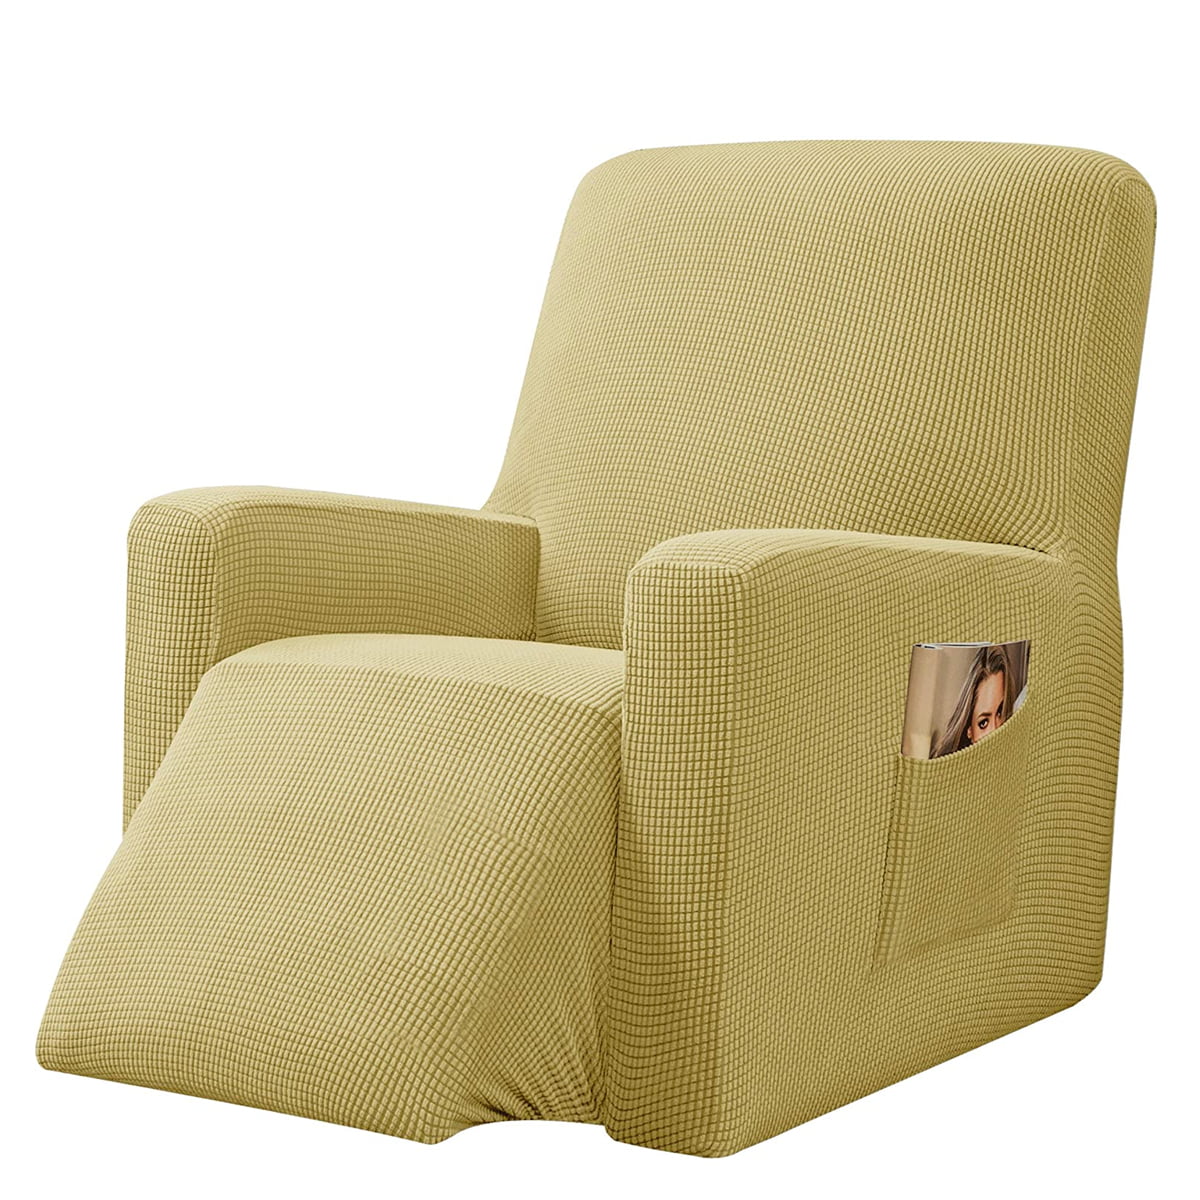 ON SALE !! JERSEY RECLINER COVER----LAZY BOY----PURPLE---VISIT OUR  STORE